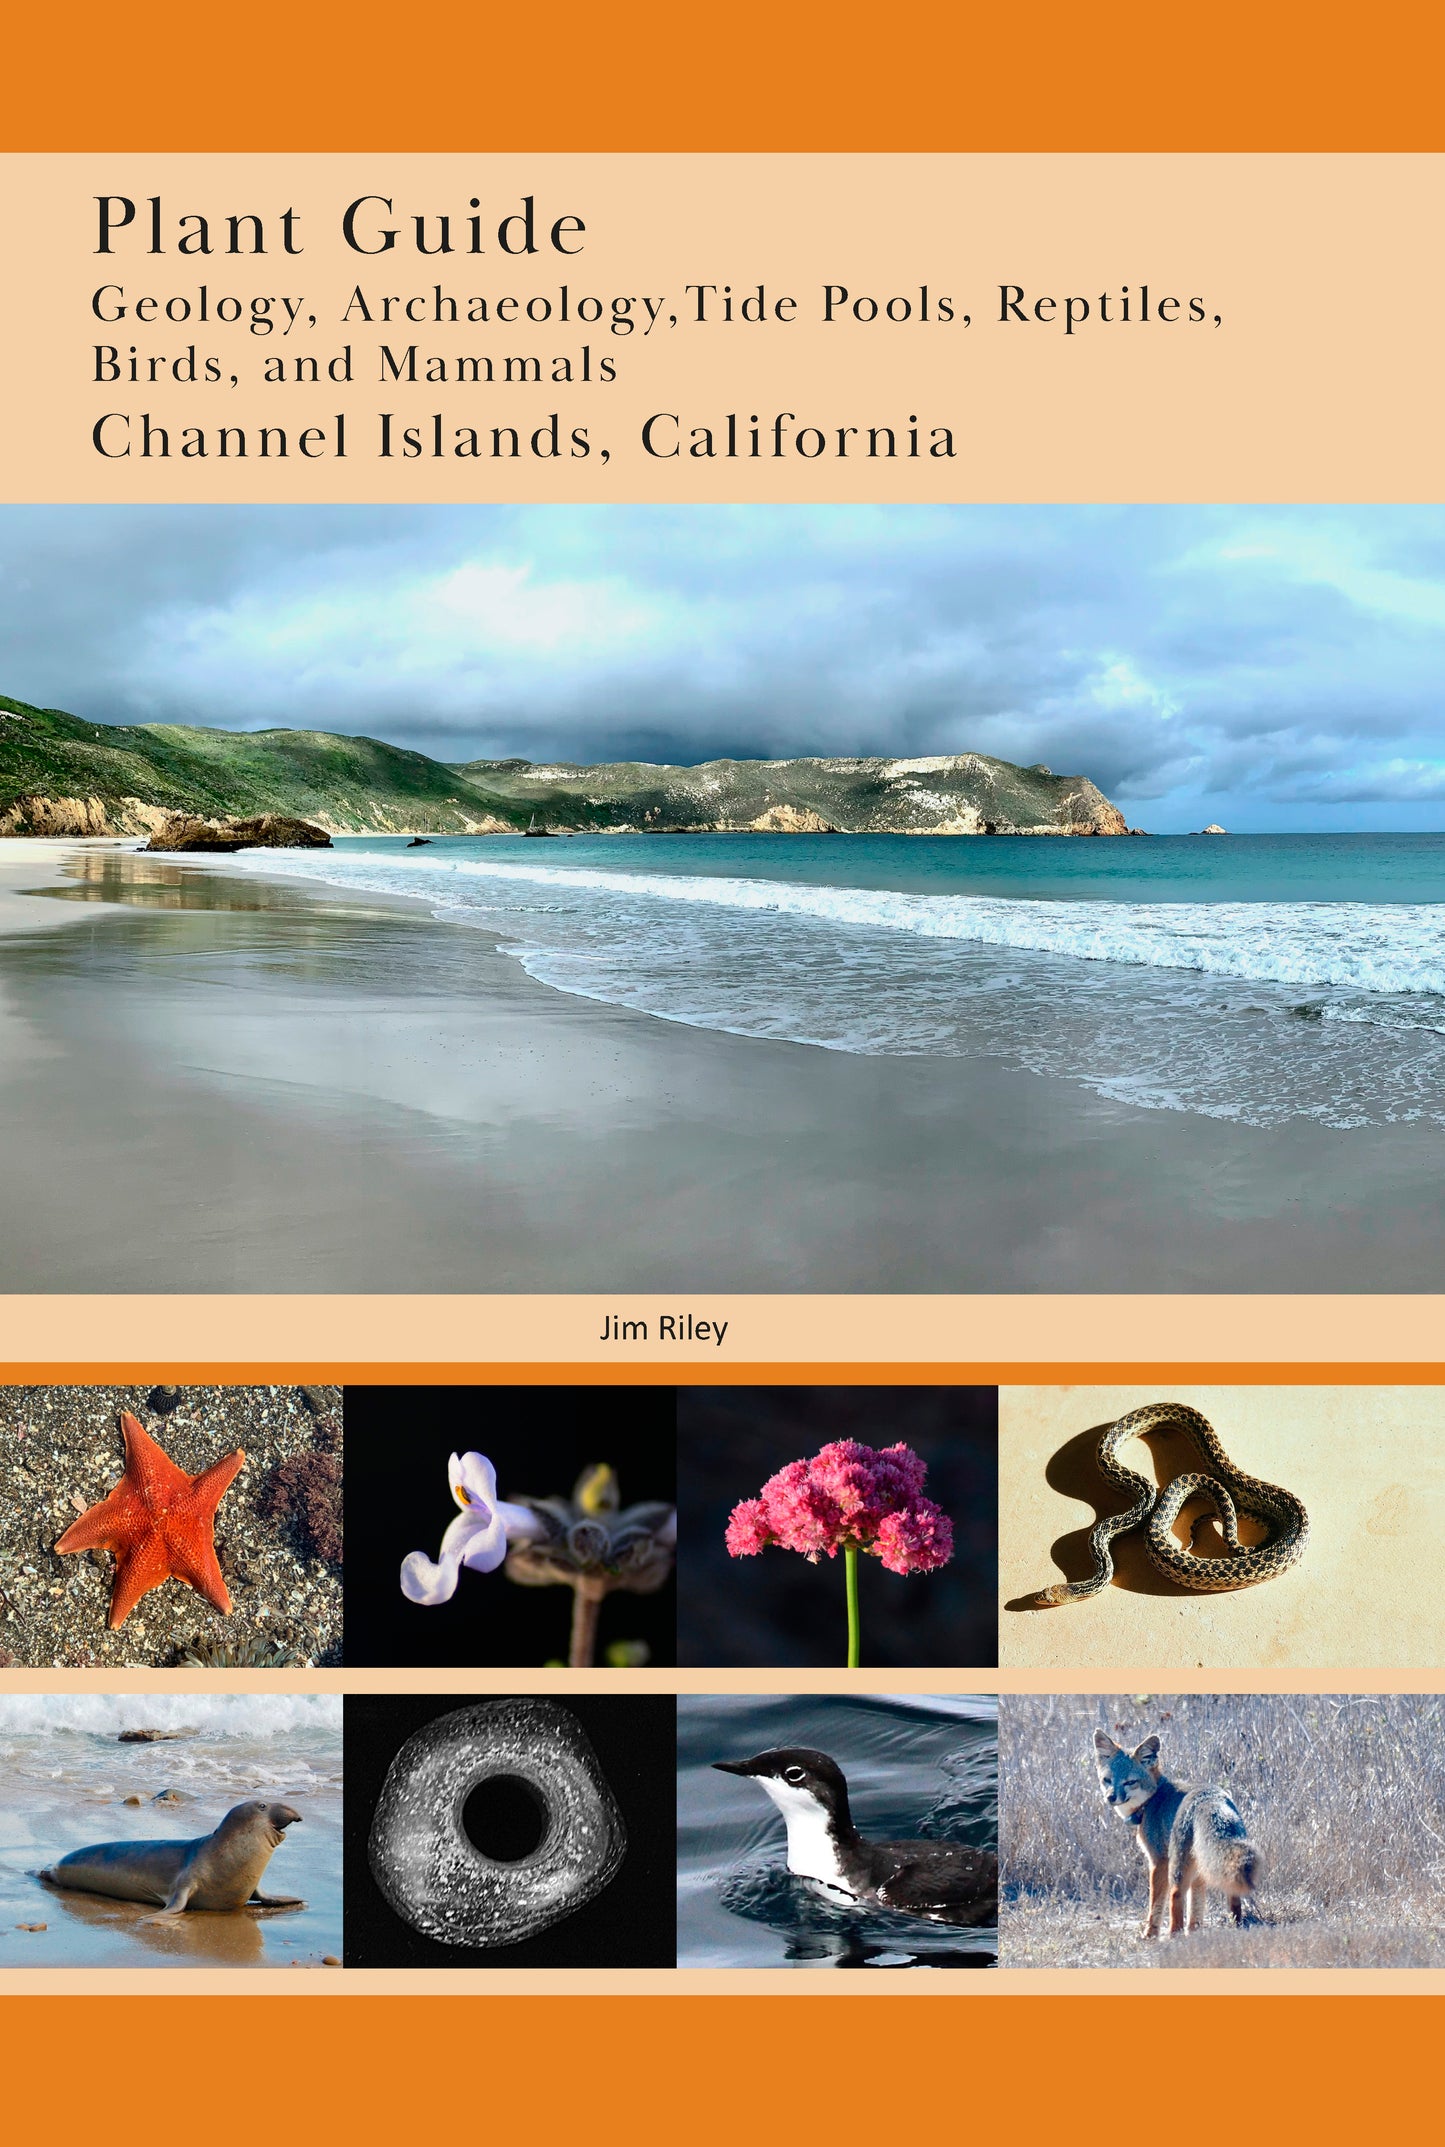 Plant Guide: Natural History, Channel Islands, California